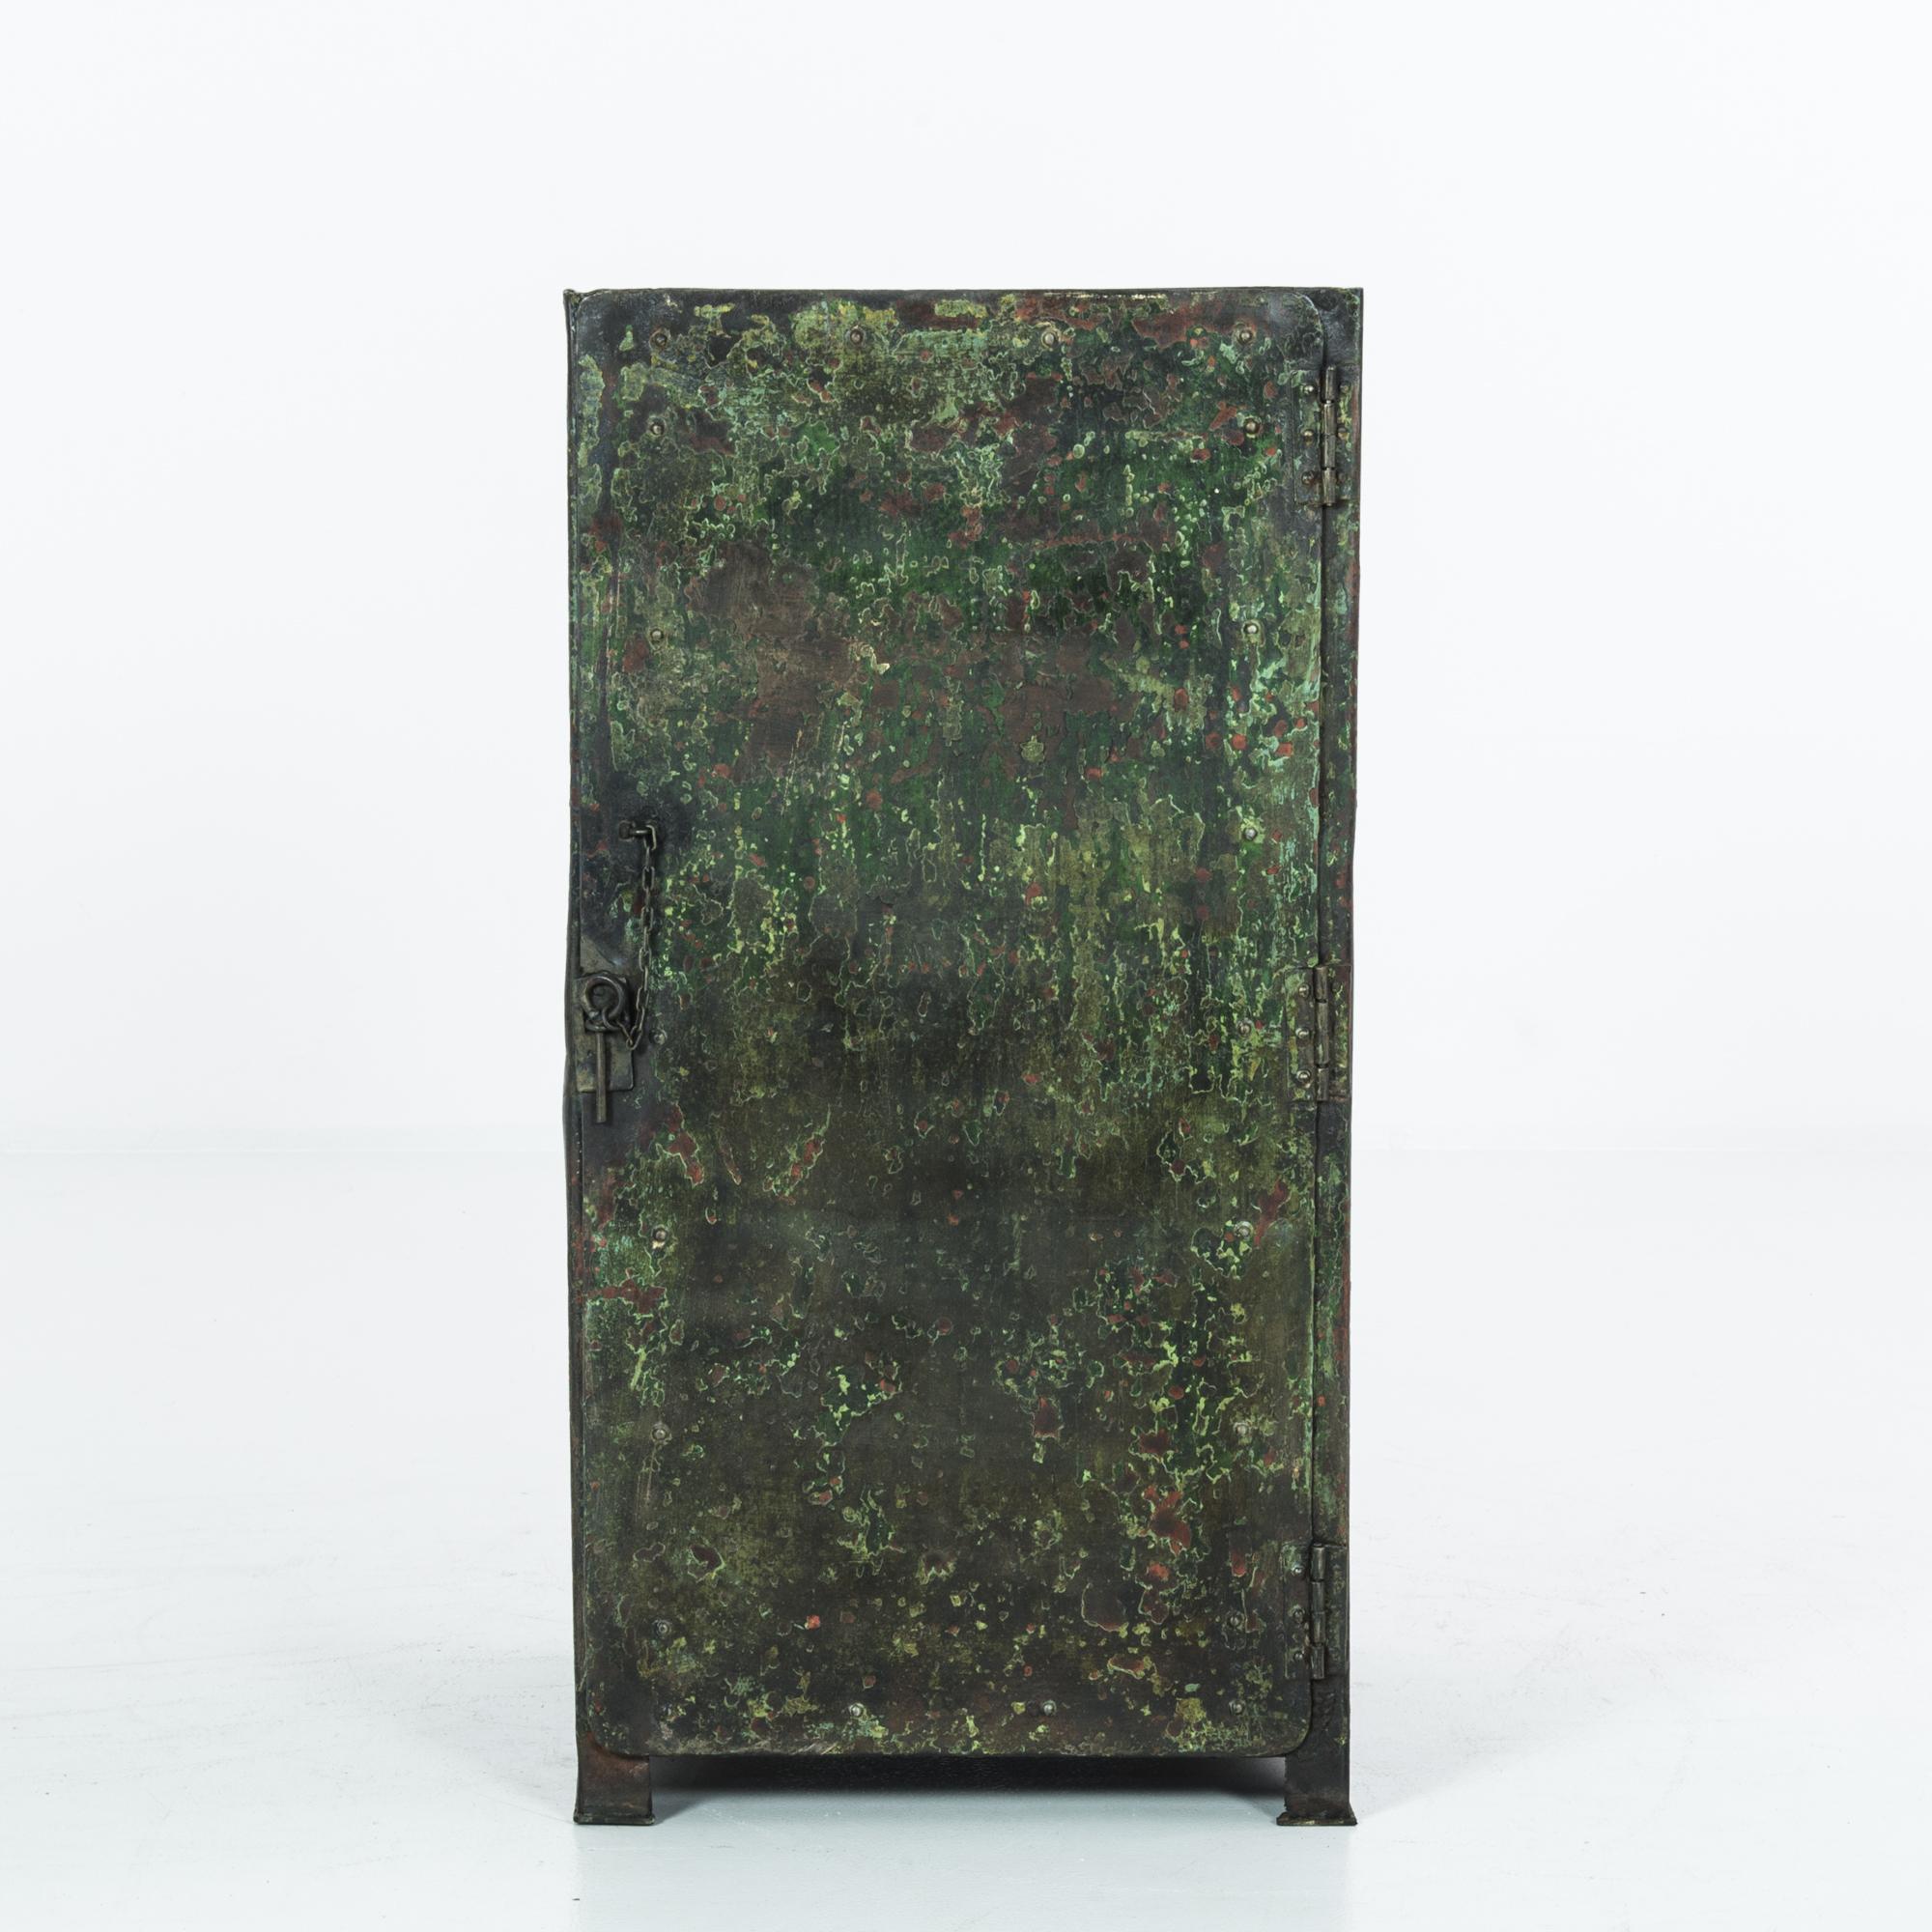 A metal cabinet from France, produced circa 1910. With the posture of a fashionable safe, this little locker breathes life into any staid interior. The green gradient of the original patination of this piece, along with its simple pin closure,